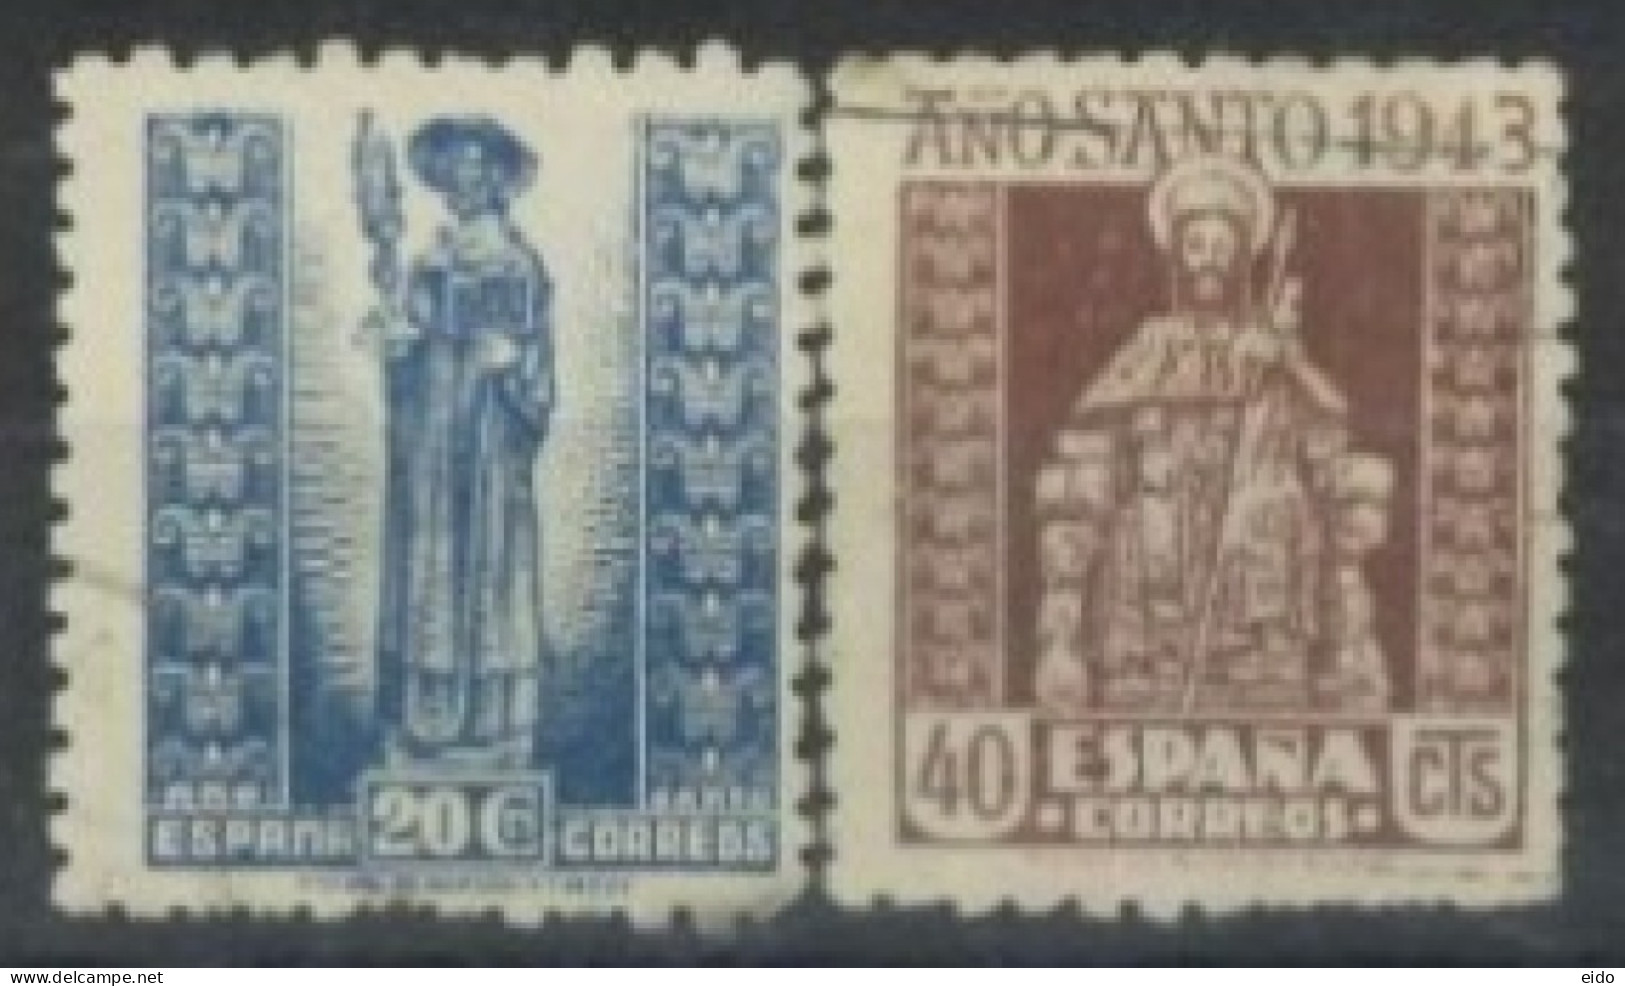 SPAIN,  1943 - ST. STATUE IN ST. JAMES CATHEDRAL & ST. JAMES OF COPOSTELA STAMPS SET OF 2, # 724/25,USED. - Usati